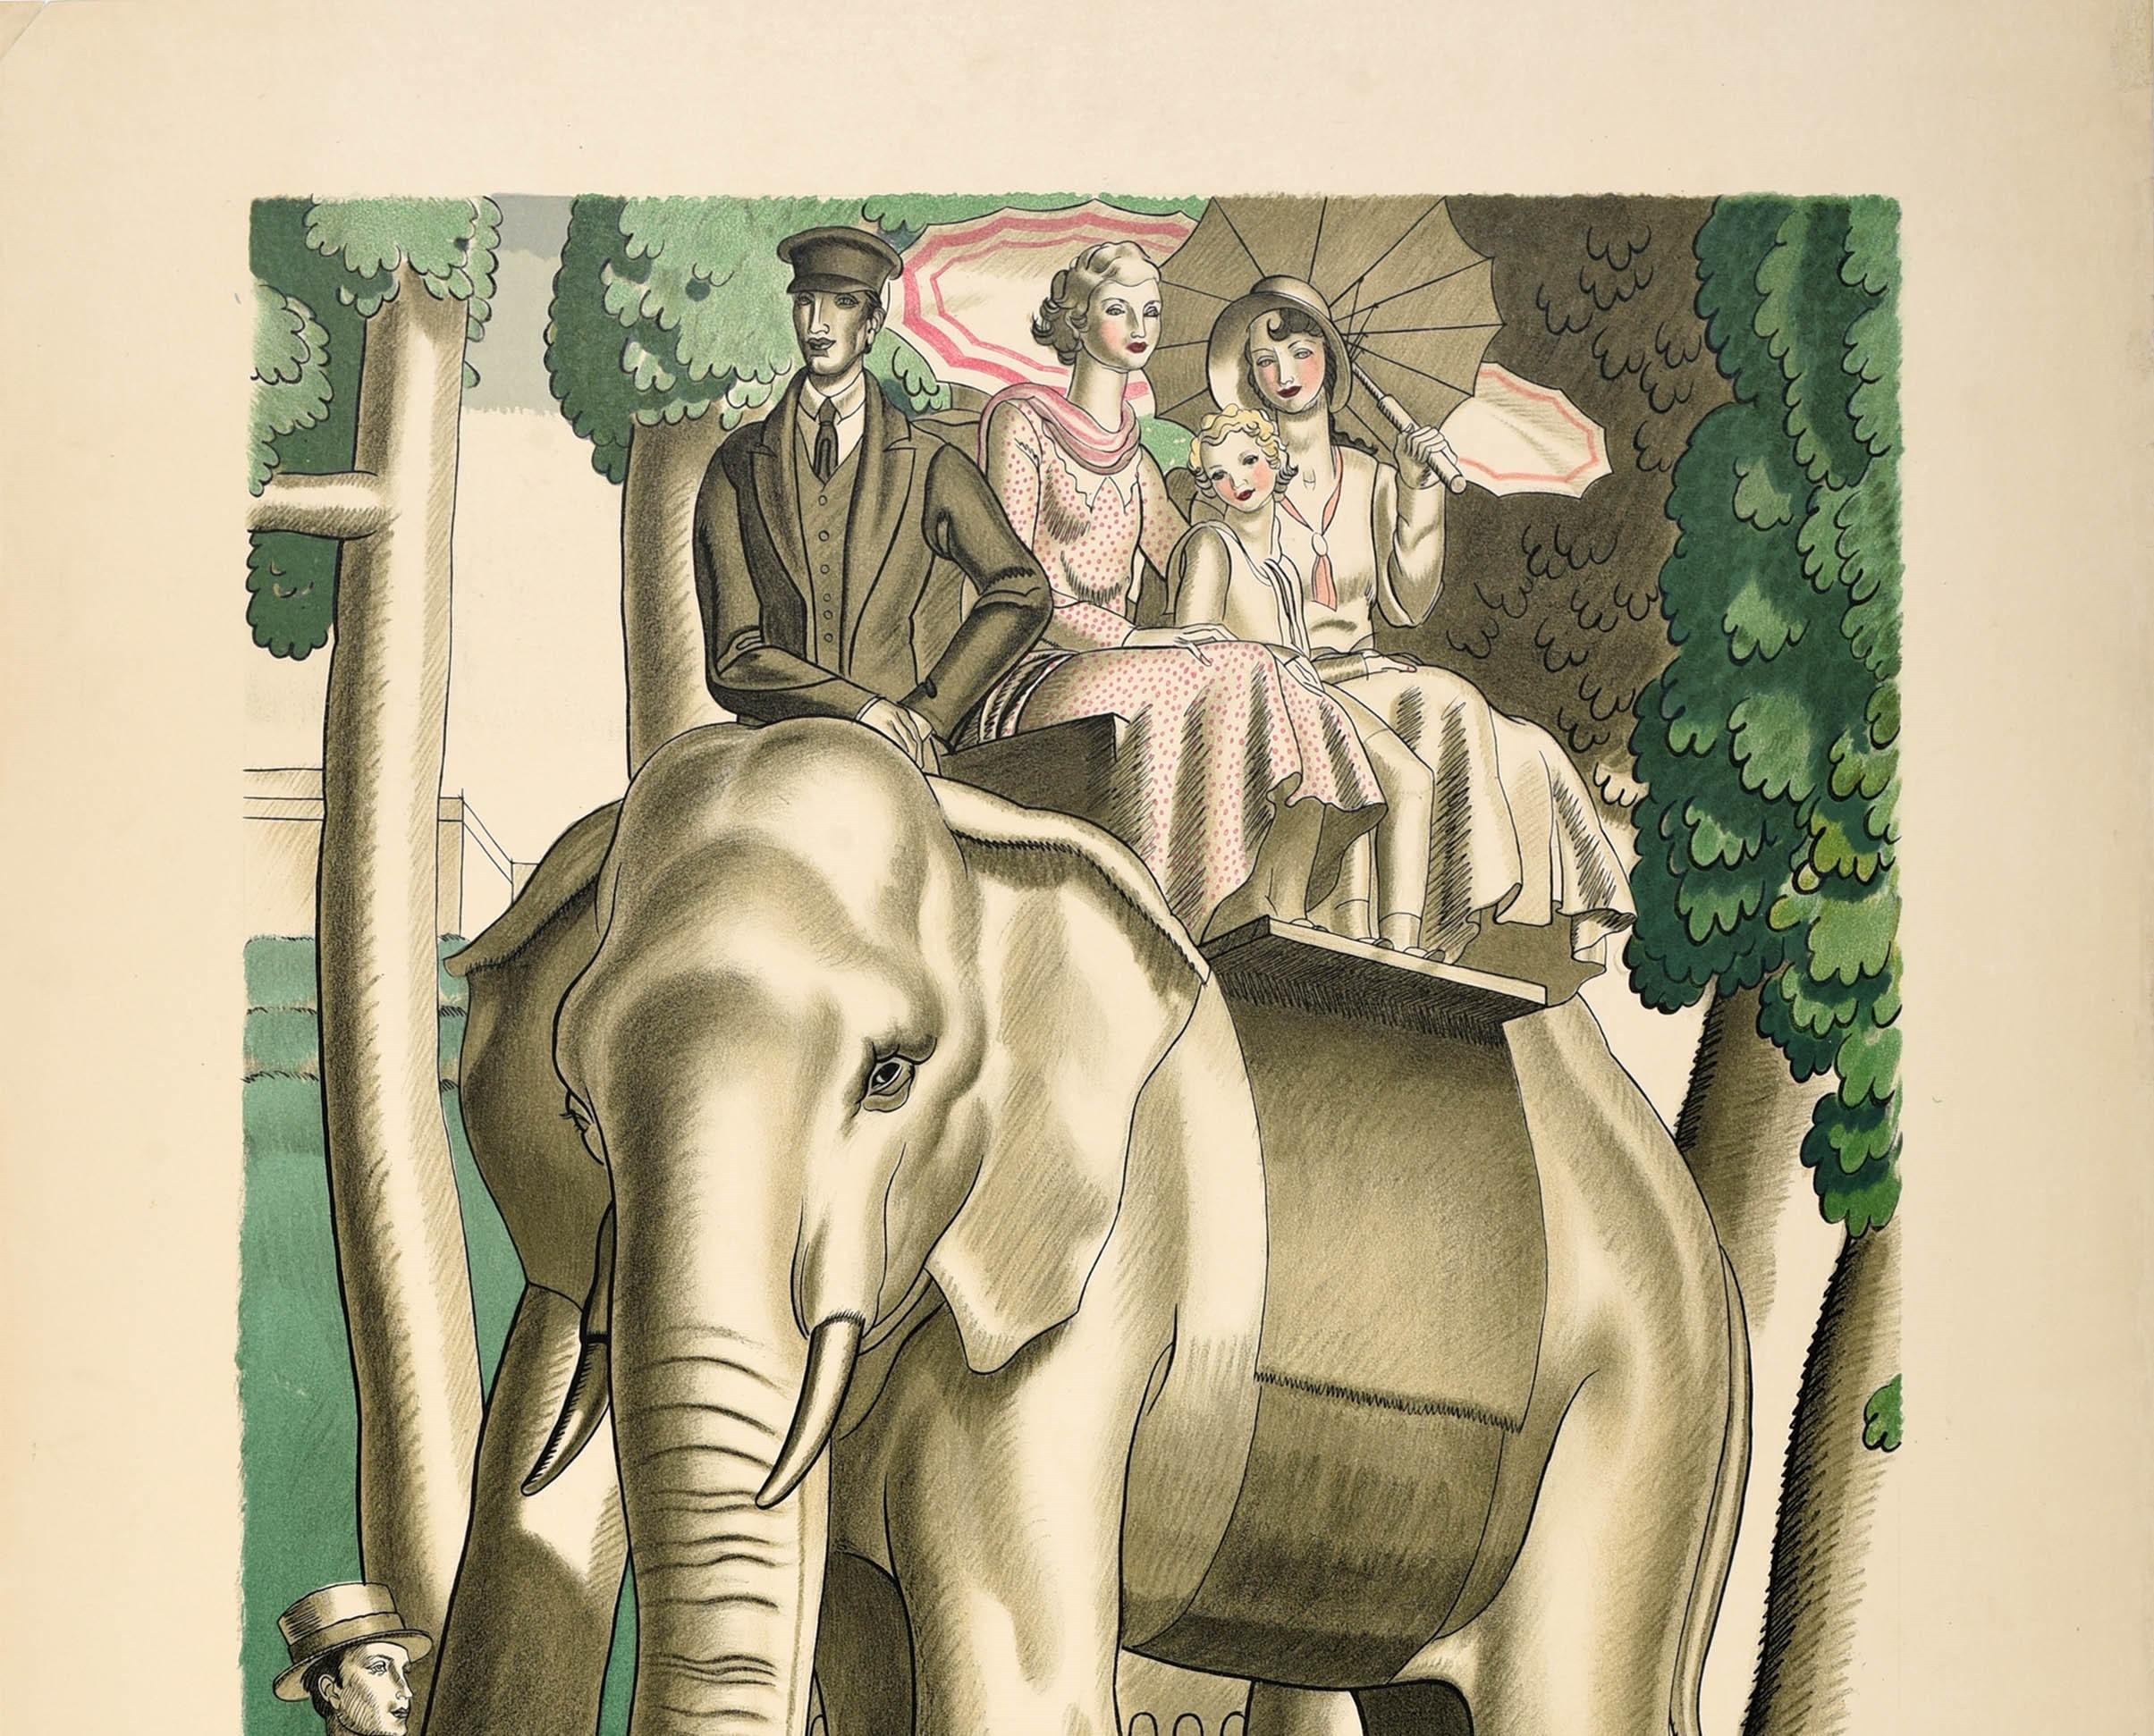 Original vintage London Transport travel poster for London Zoo via Camden Town Chalk Farm or Regents Park Underground Station - There's a Transport of Joy at the Zoo - featuring stunning artwork by the notable French Art Deco designer Jean Dupas